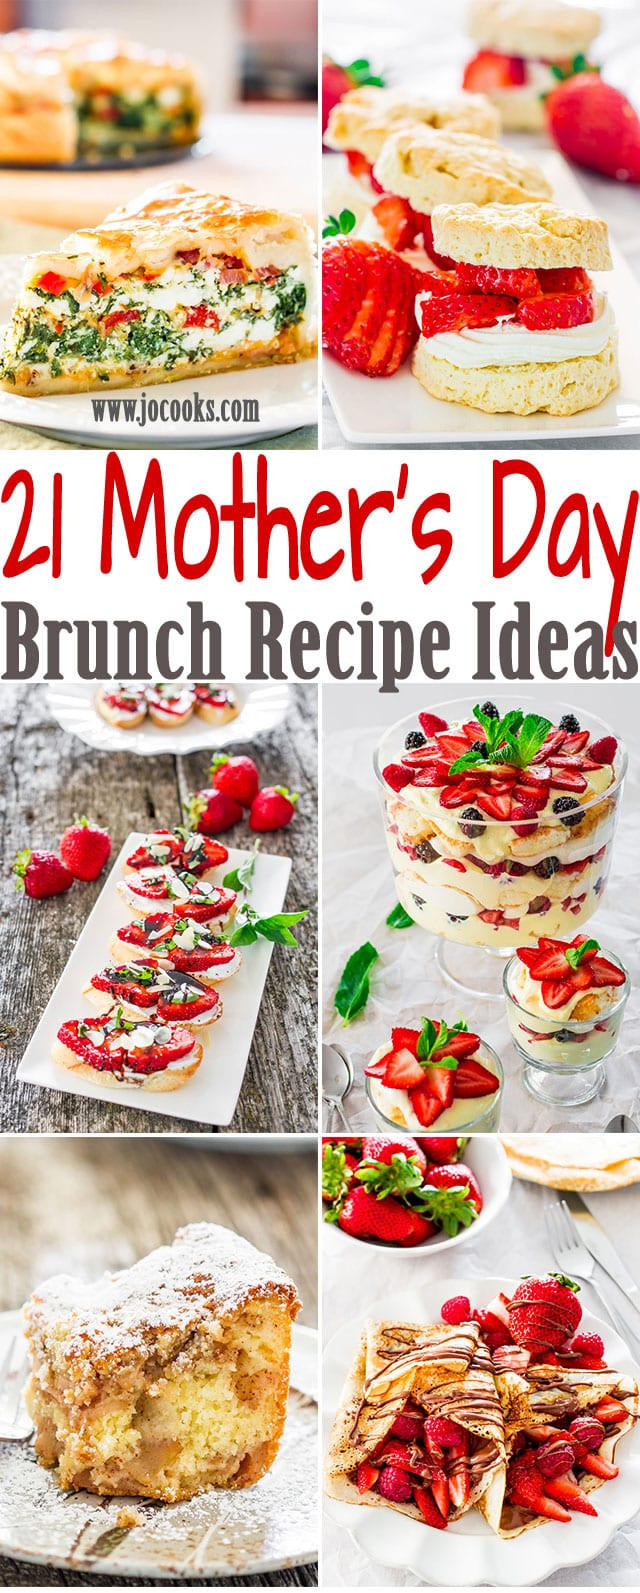 Mother's Day Dinner Ideas
 21 Mother s Day Brunch Recipe Ideas Your Mom Would Love